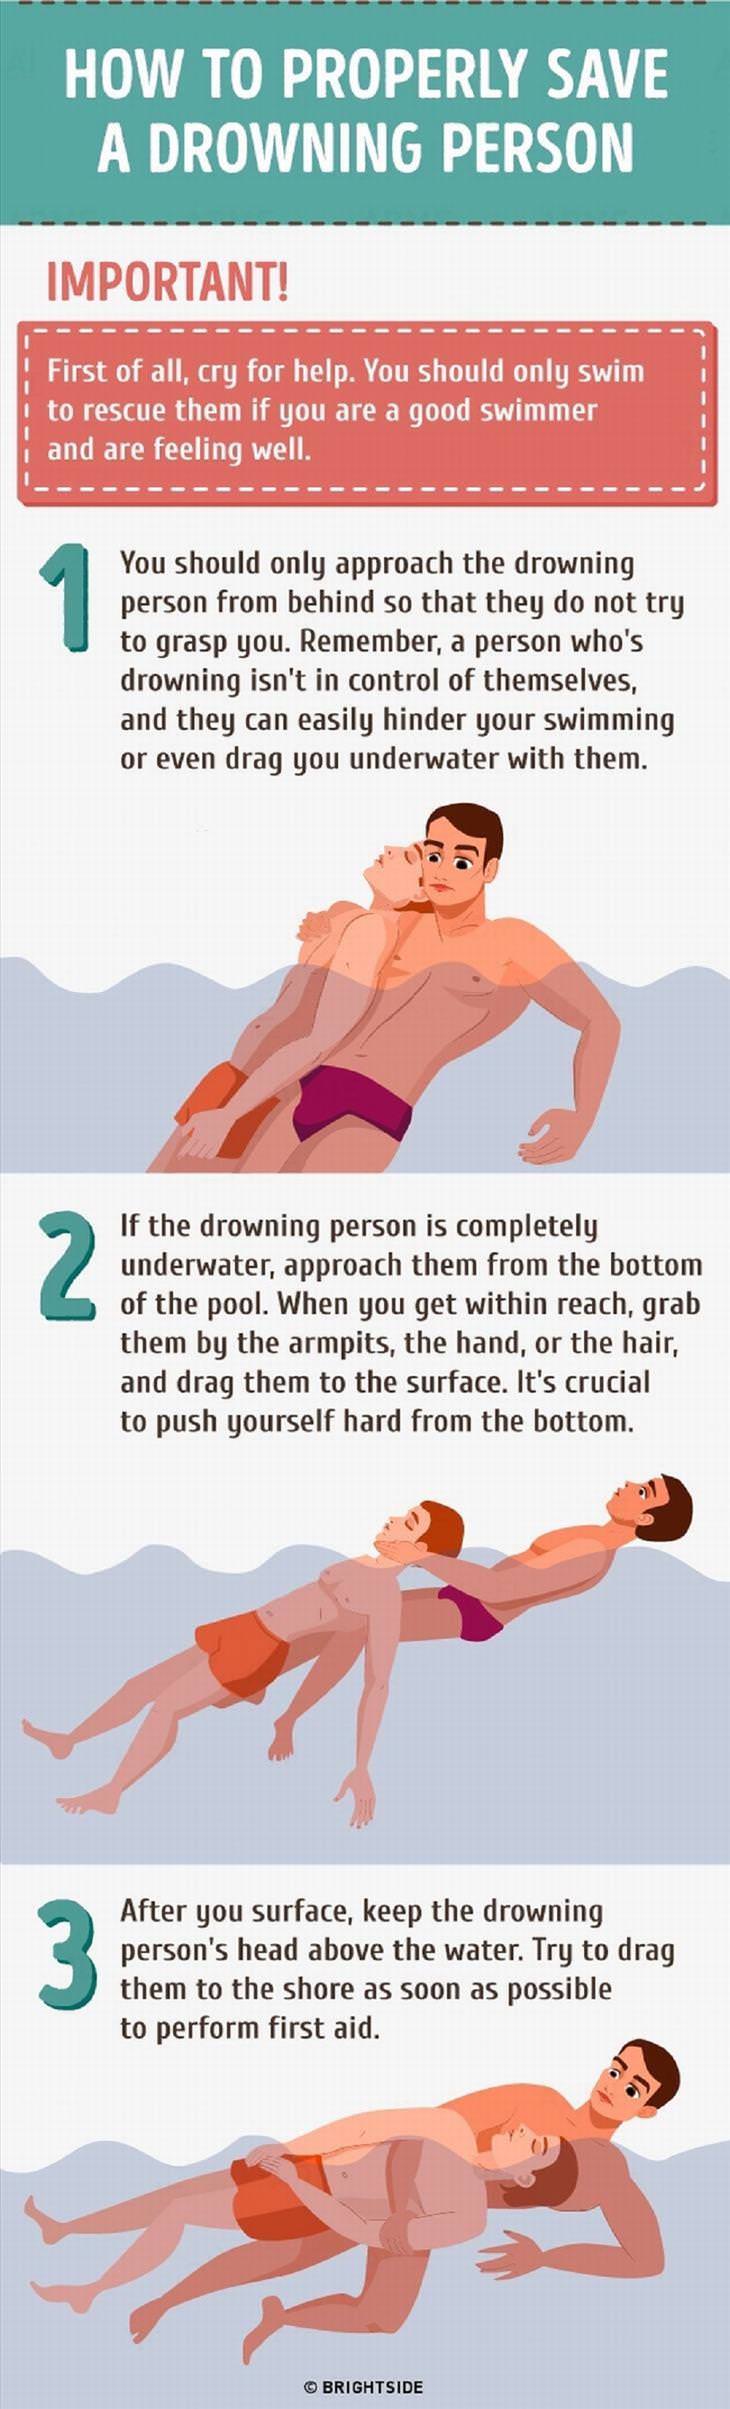 drowning guide